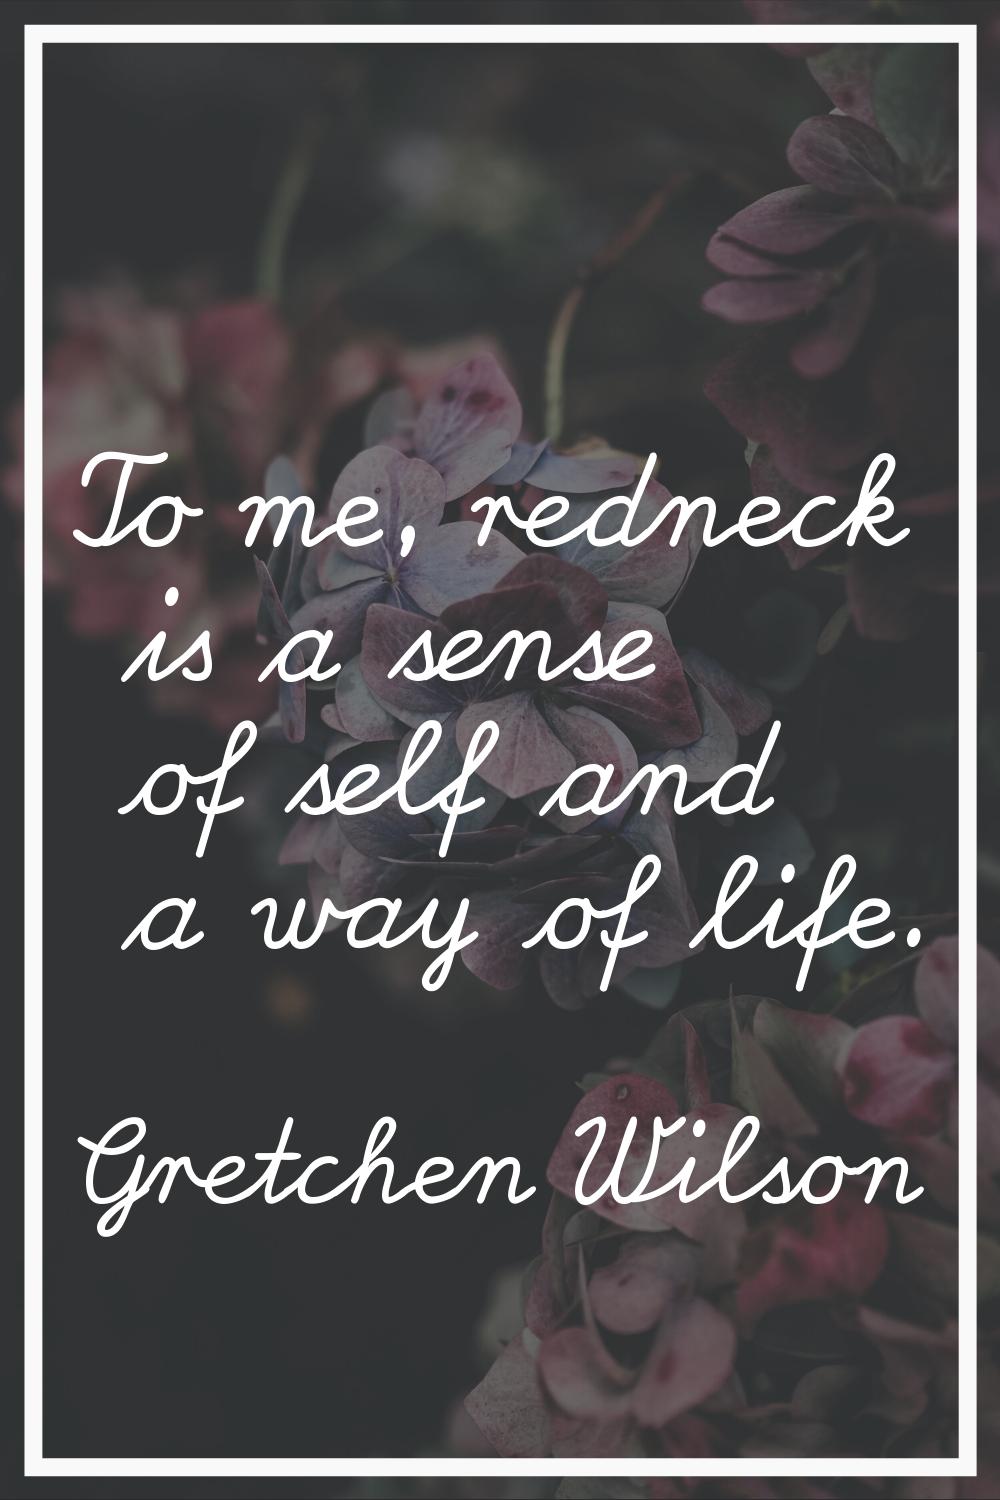 To me, redneck is a sense of self and a way of life.